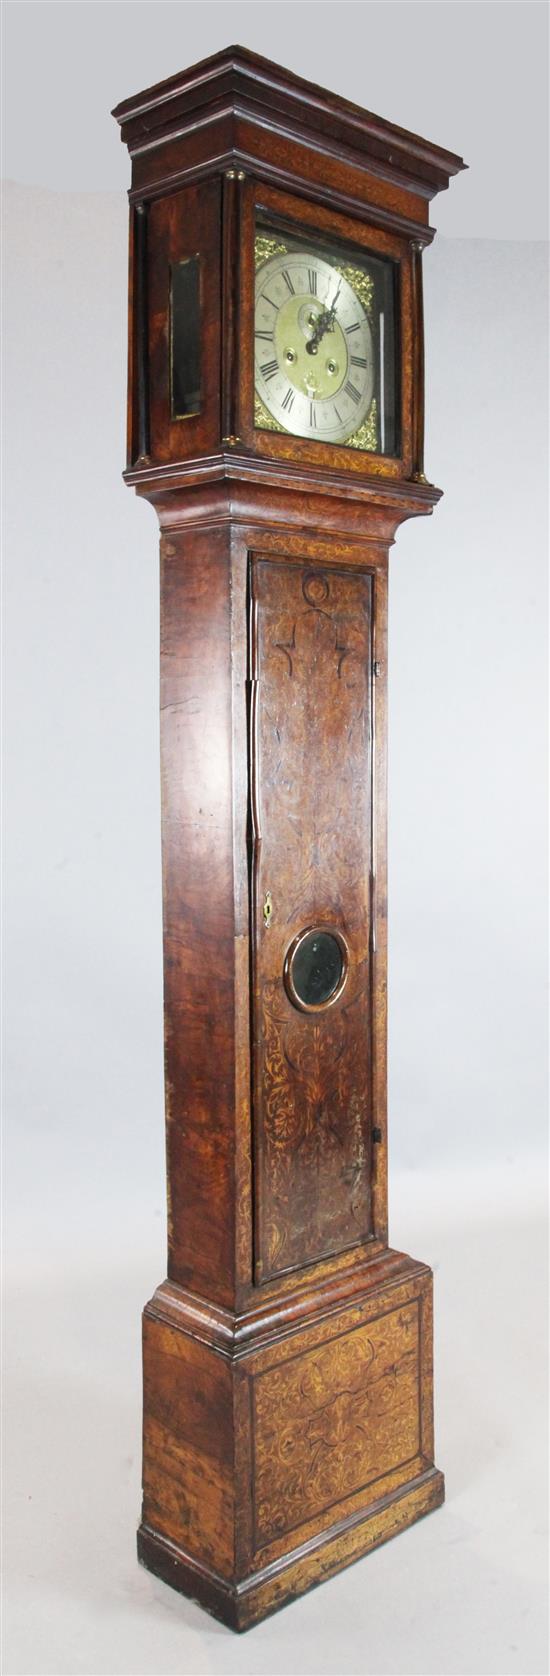 Thomas Ingram of London. An early 18th century walnut and seaweed marquetry eight day longcase clock, H.7ft 2in.